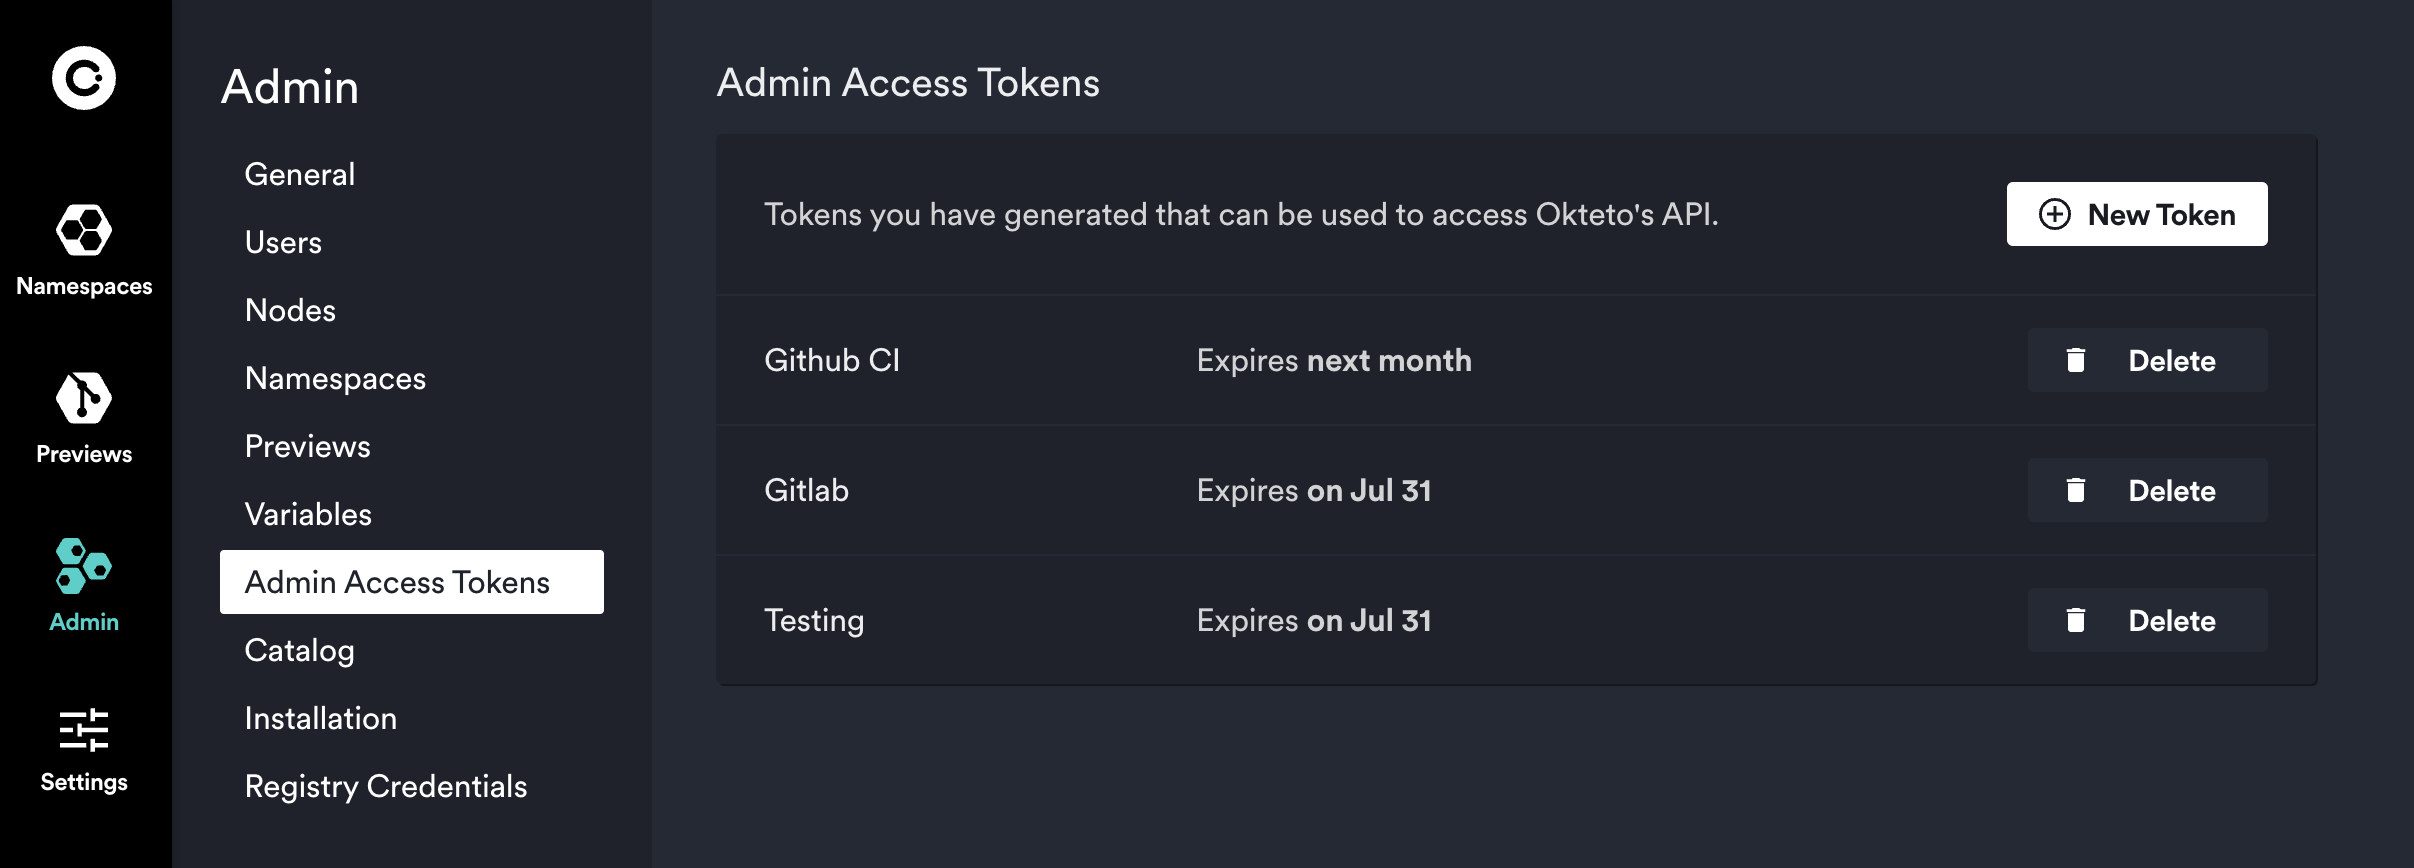 Admin Access Tokens view